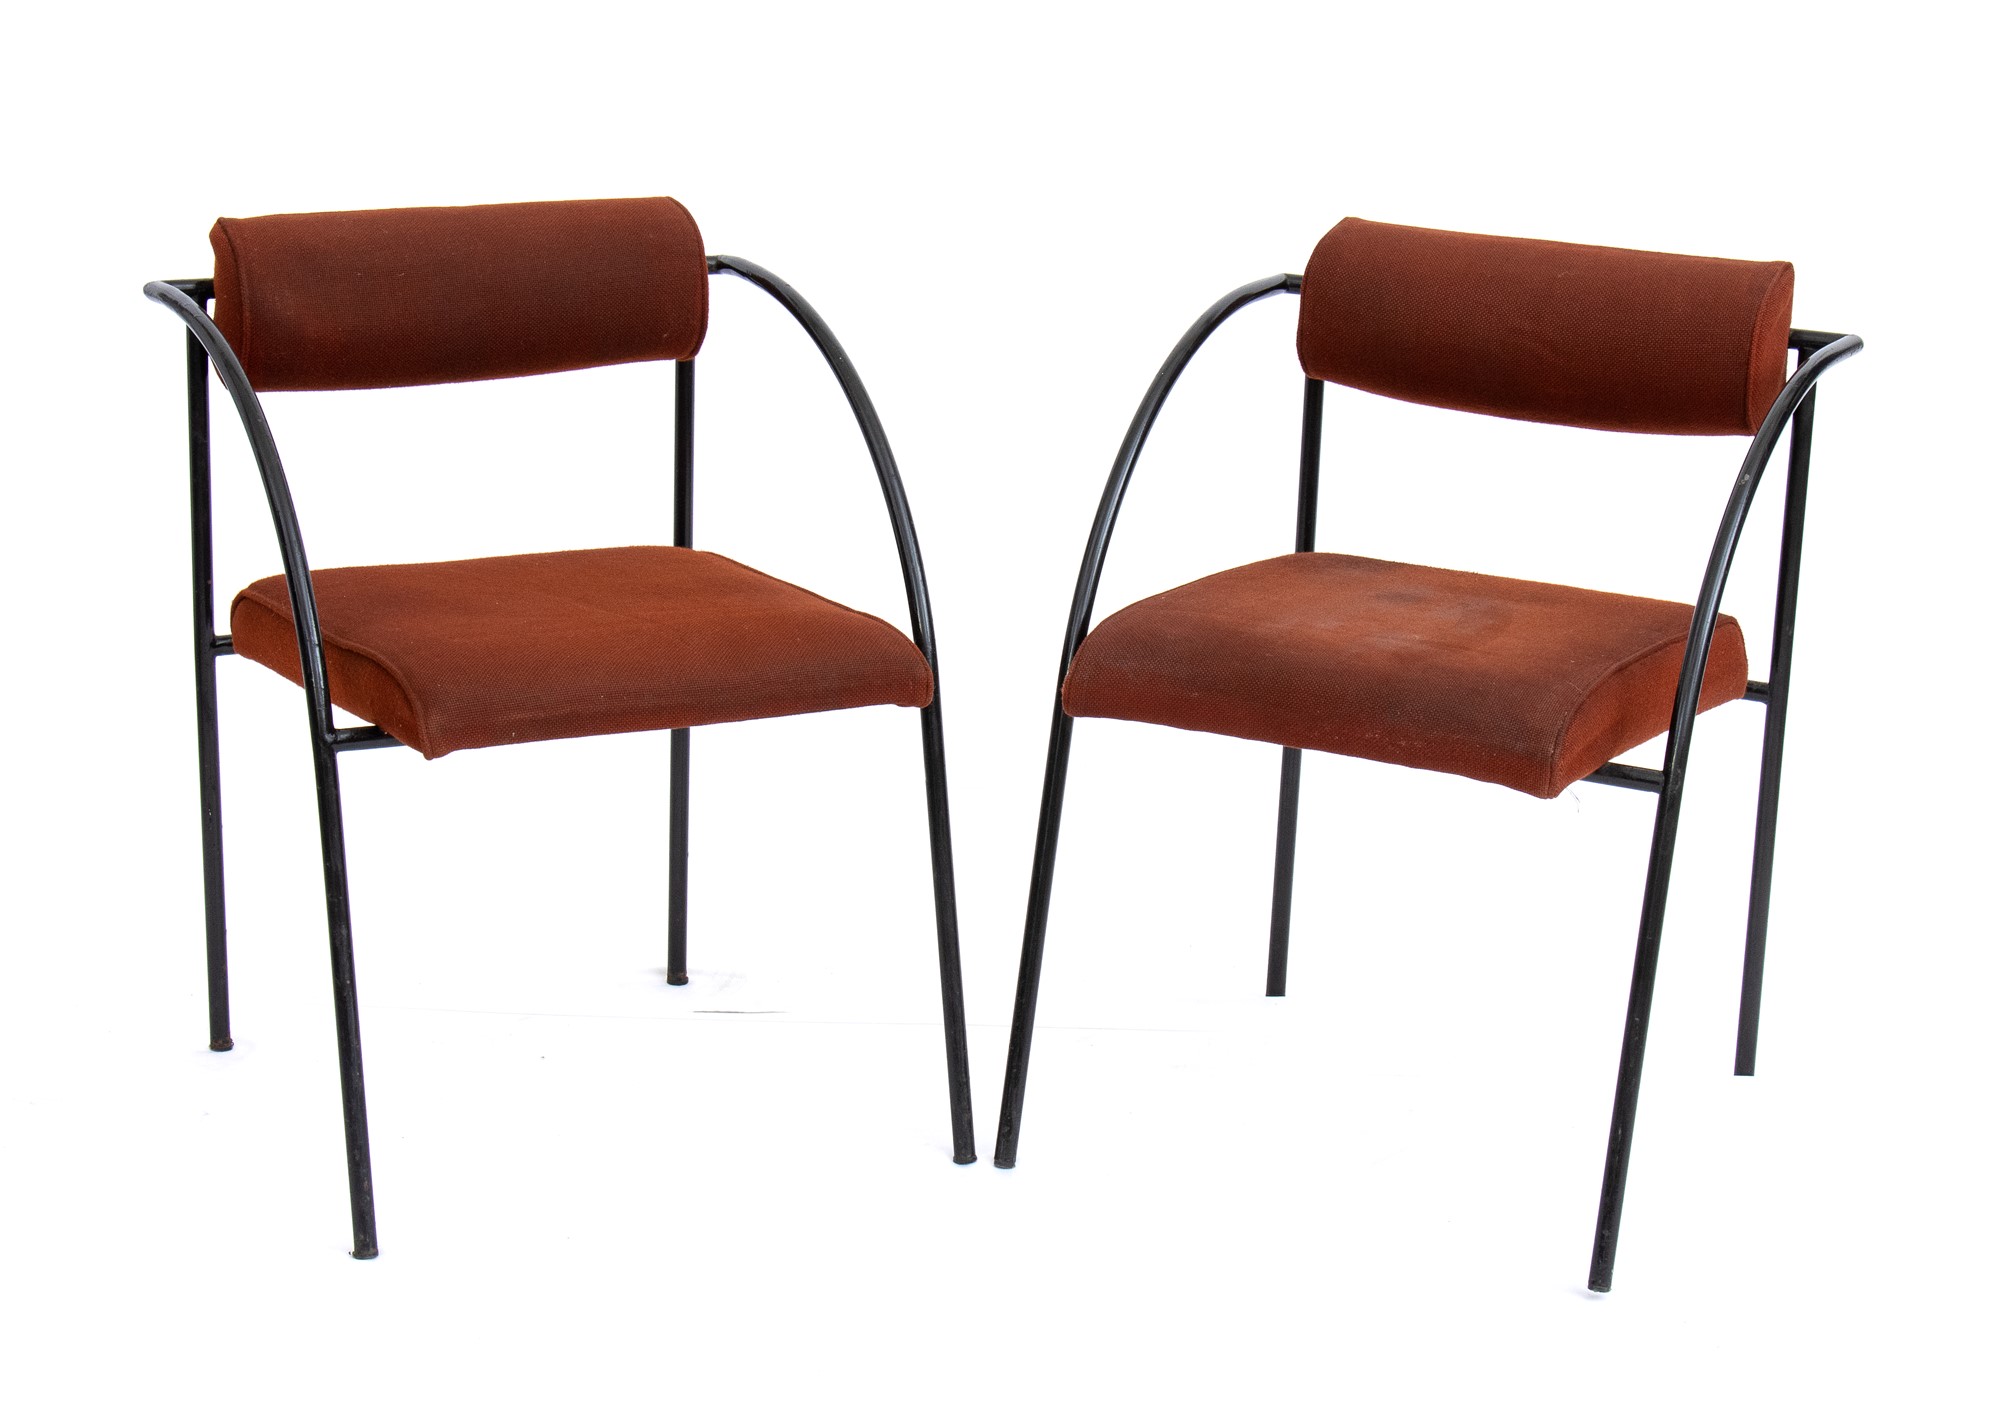 Rodney Kinsman Londra 1943 Set of two Wien chairs with round metal structure and curved armrests